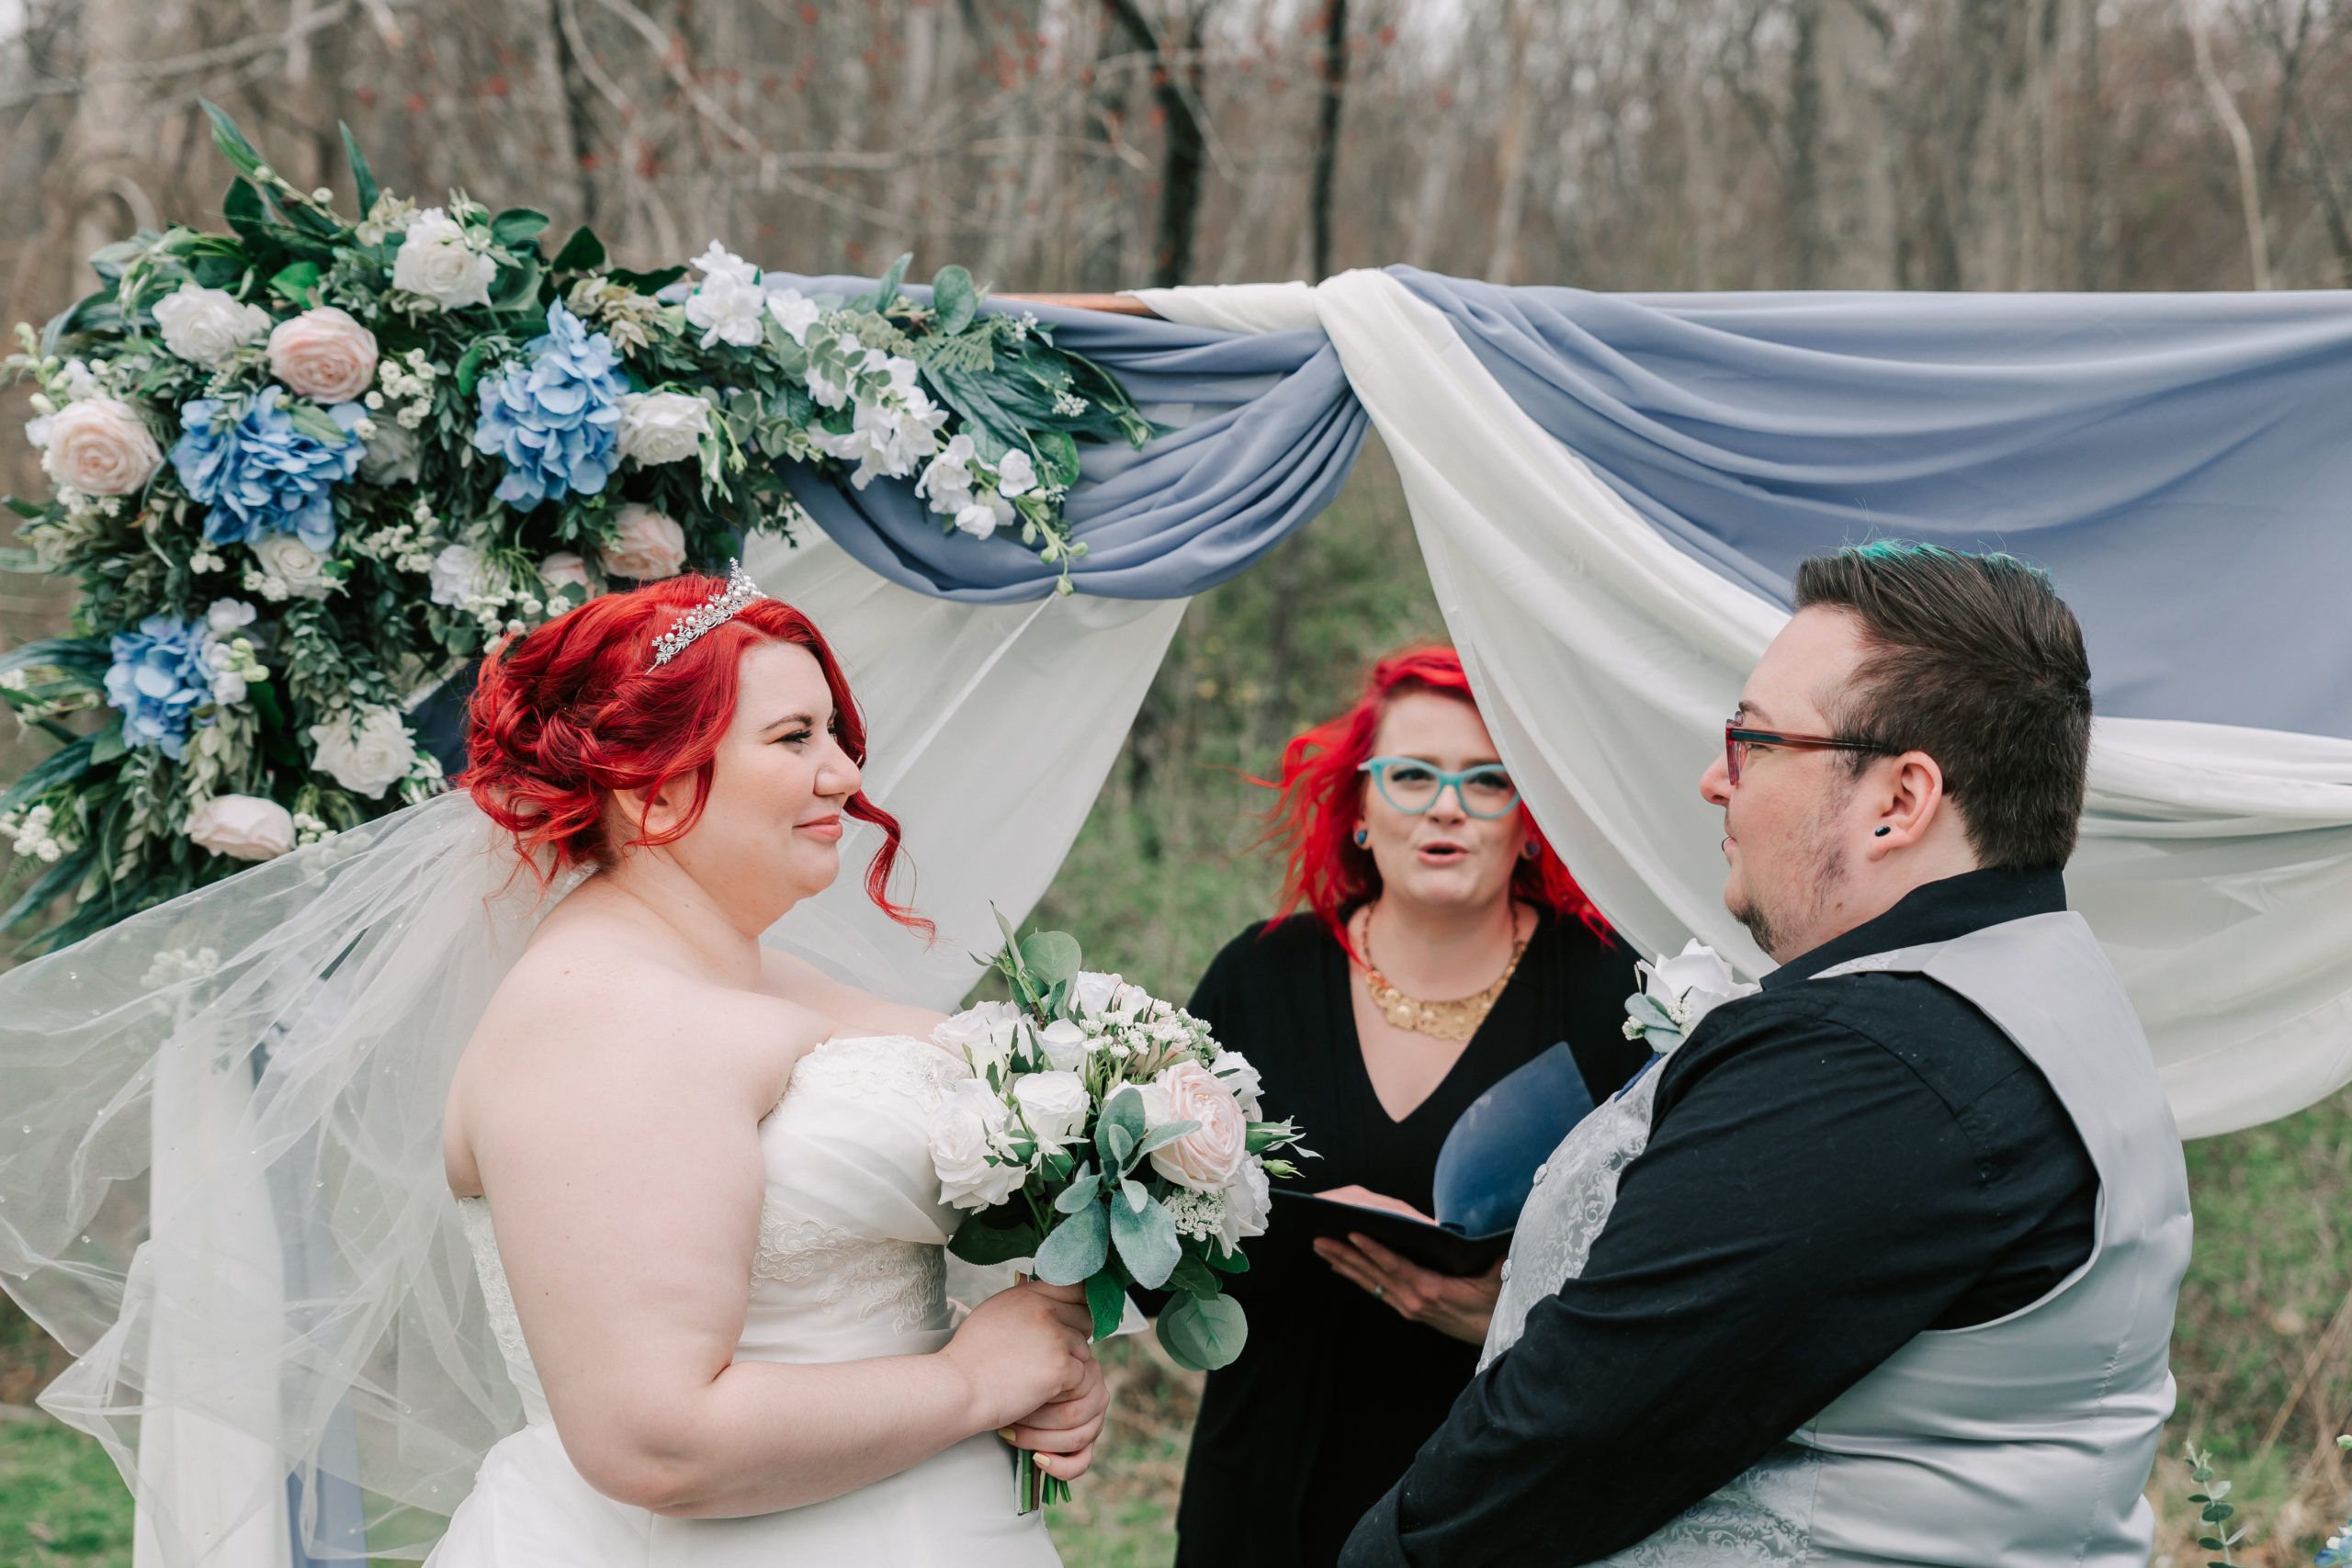 An intimate wedding ceremony led by April of The Offbeat Officiant, a Boston wedding officiant